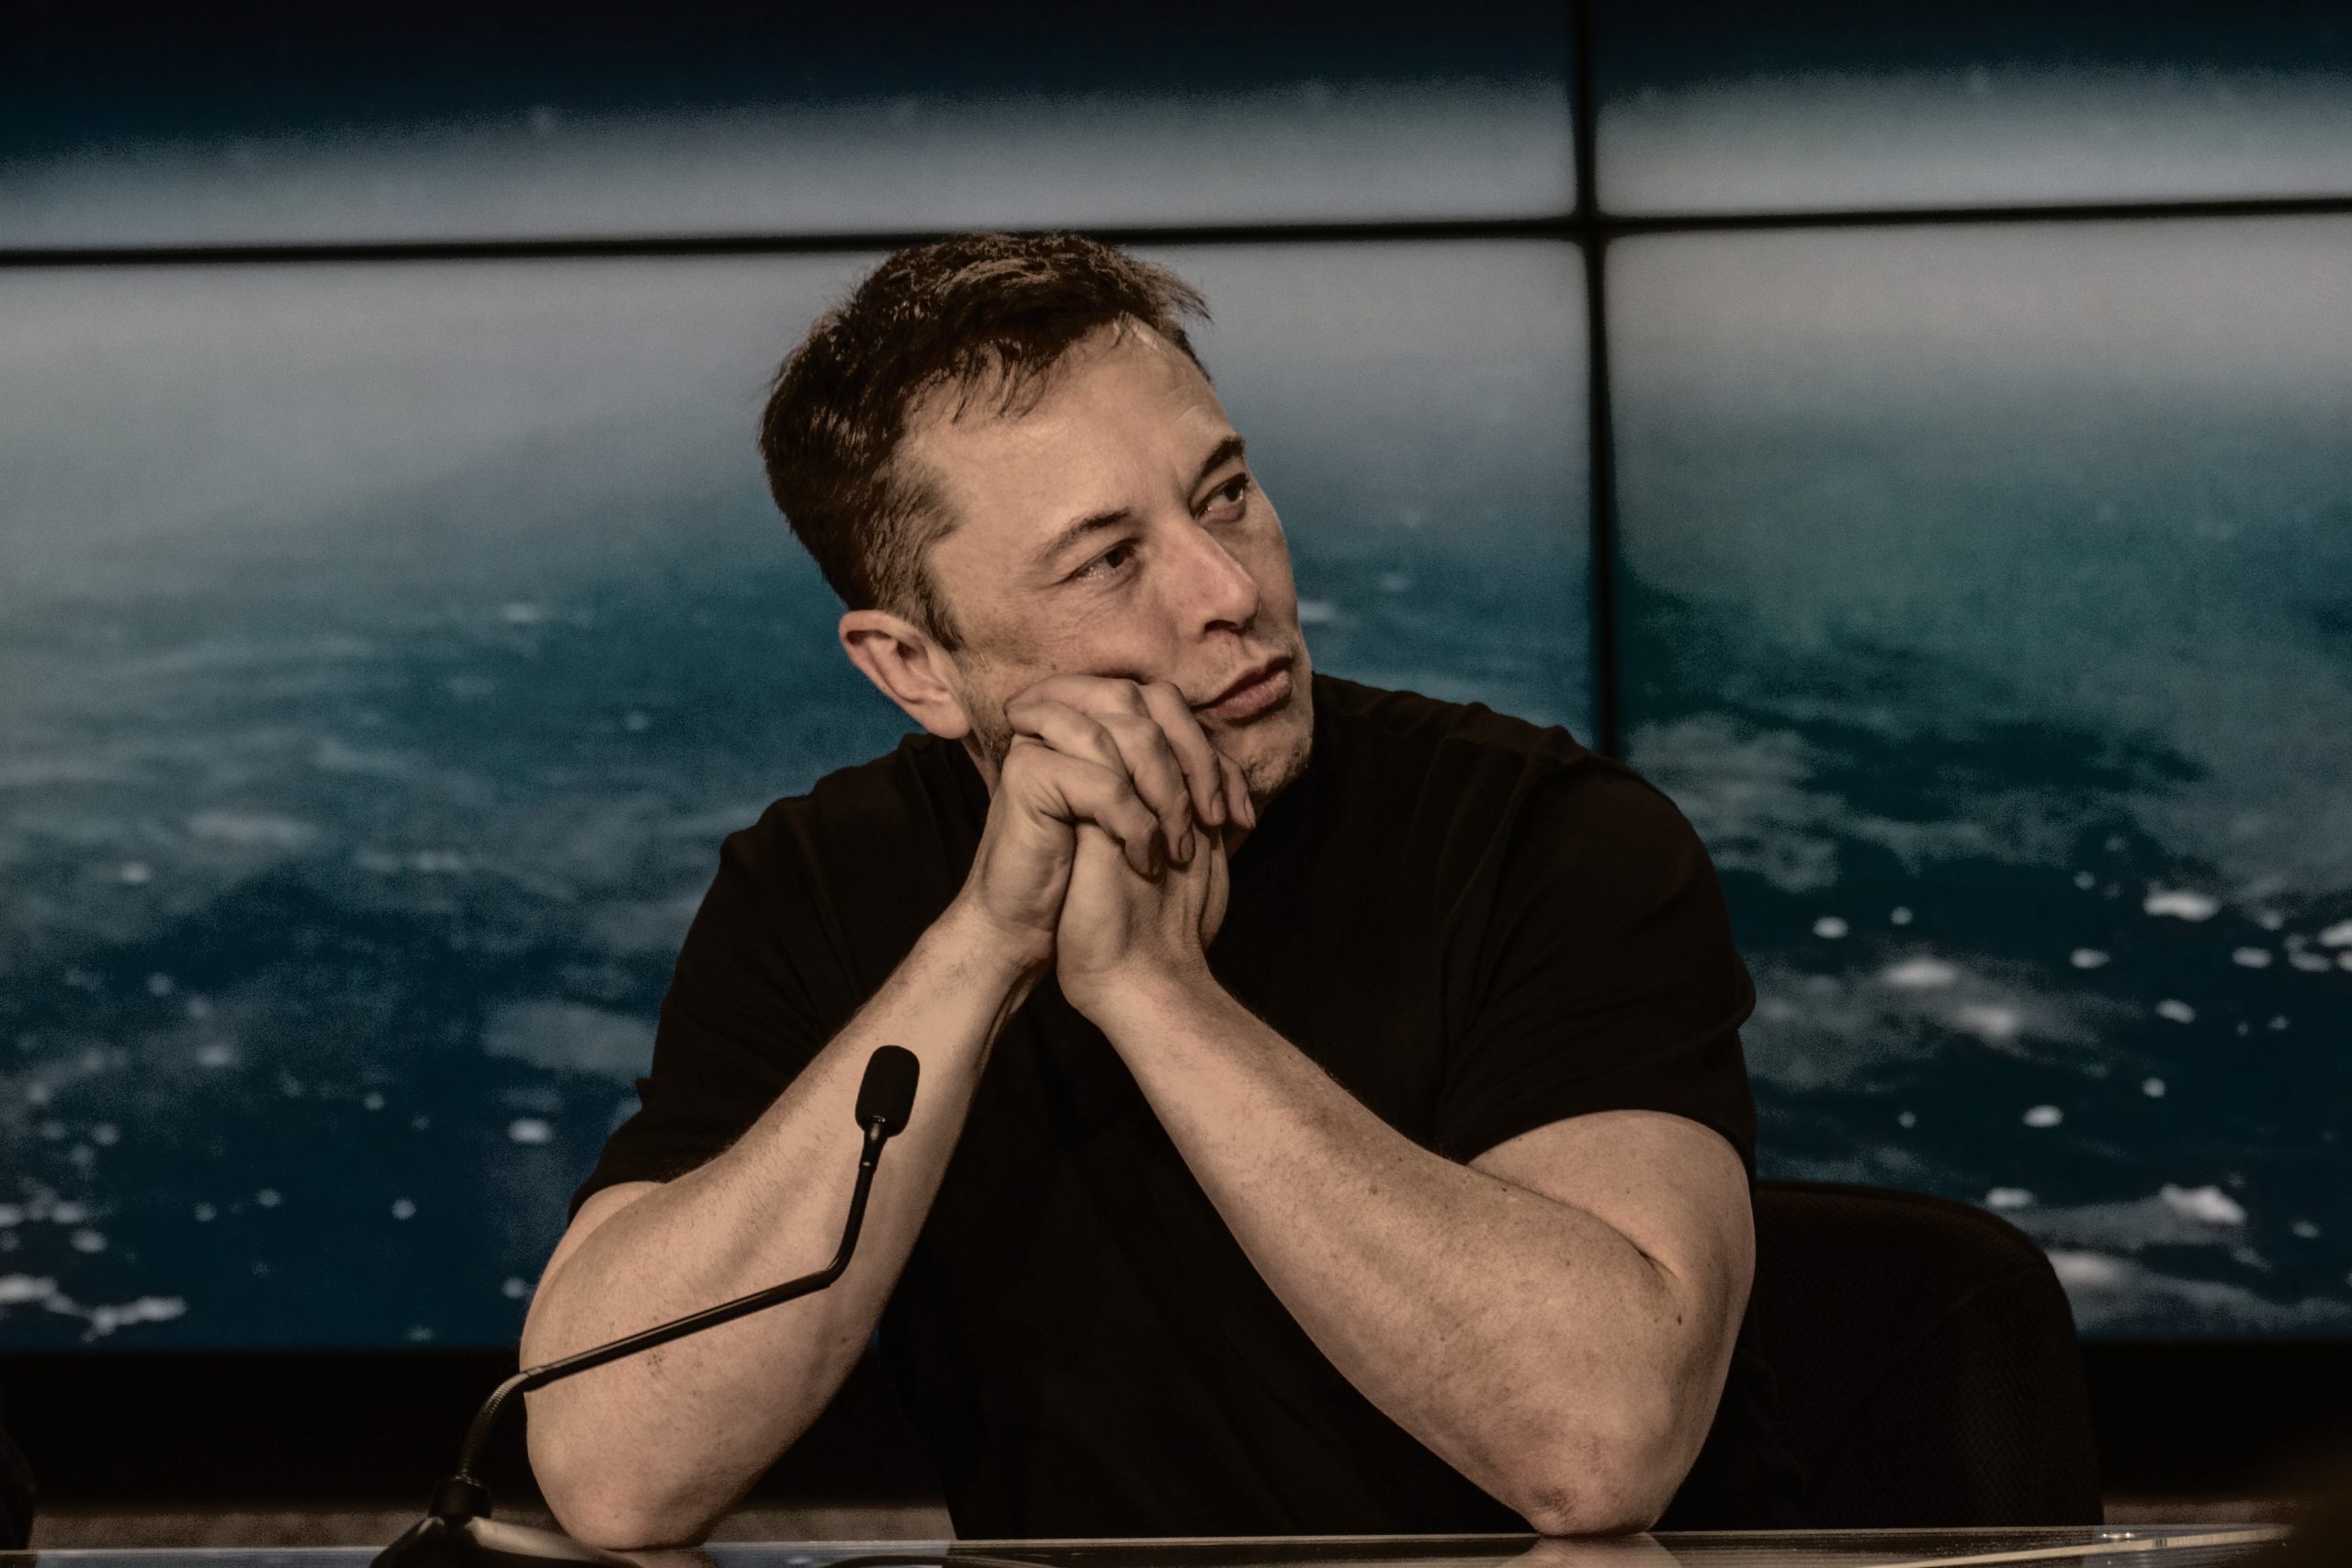 Are People Like Elon Musk A Modern Example of The Rich Man in Lazarus?